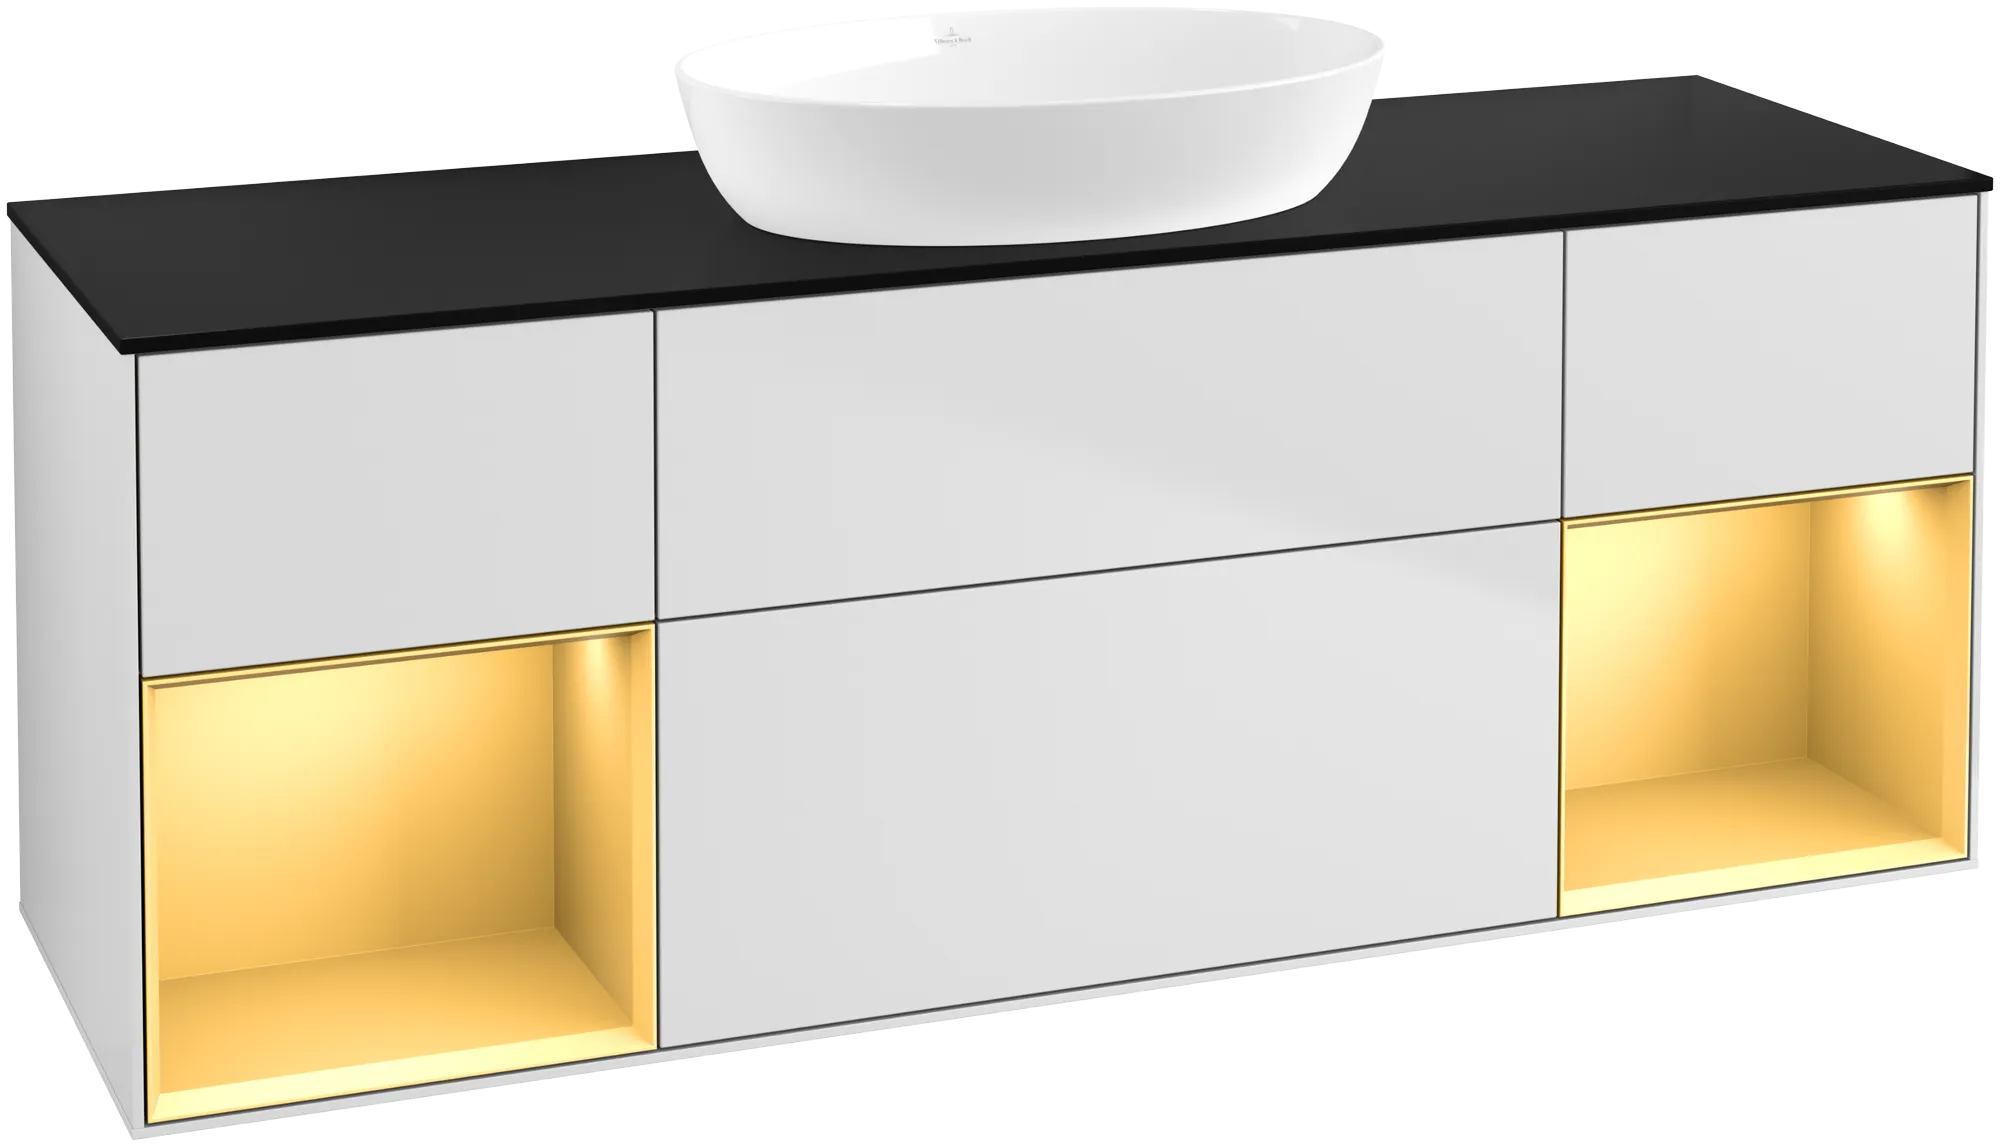 Picture of VILLEROY BOCH Finion Vanity unit, with lighting, 4 pull-out compartments, 1600 x 603 x 501 mm, White Matt Lacquer / Gold Matt Lacquer / Glass Black Matt #GD02HFMT